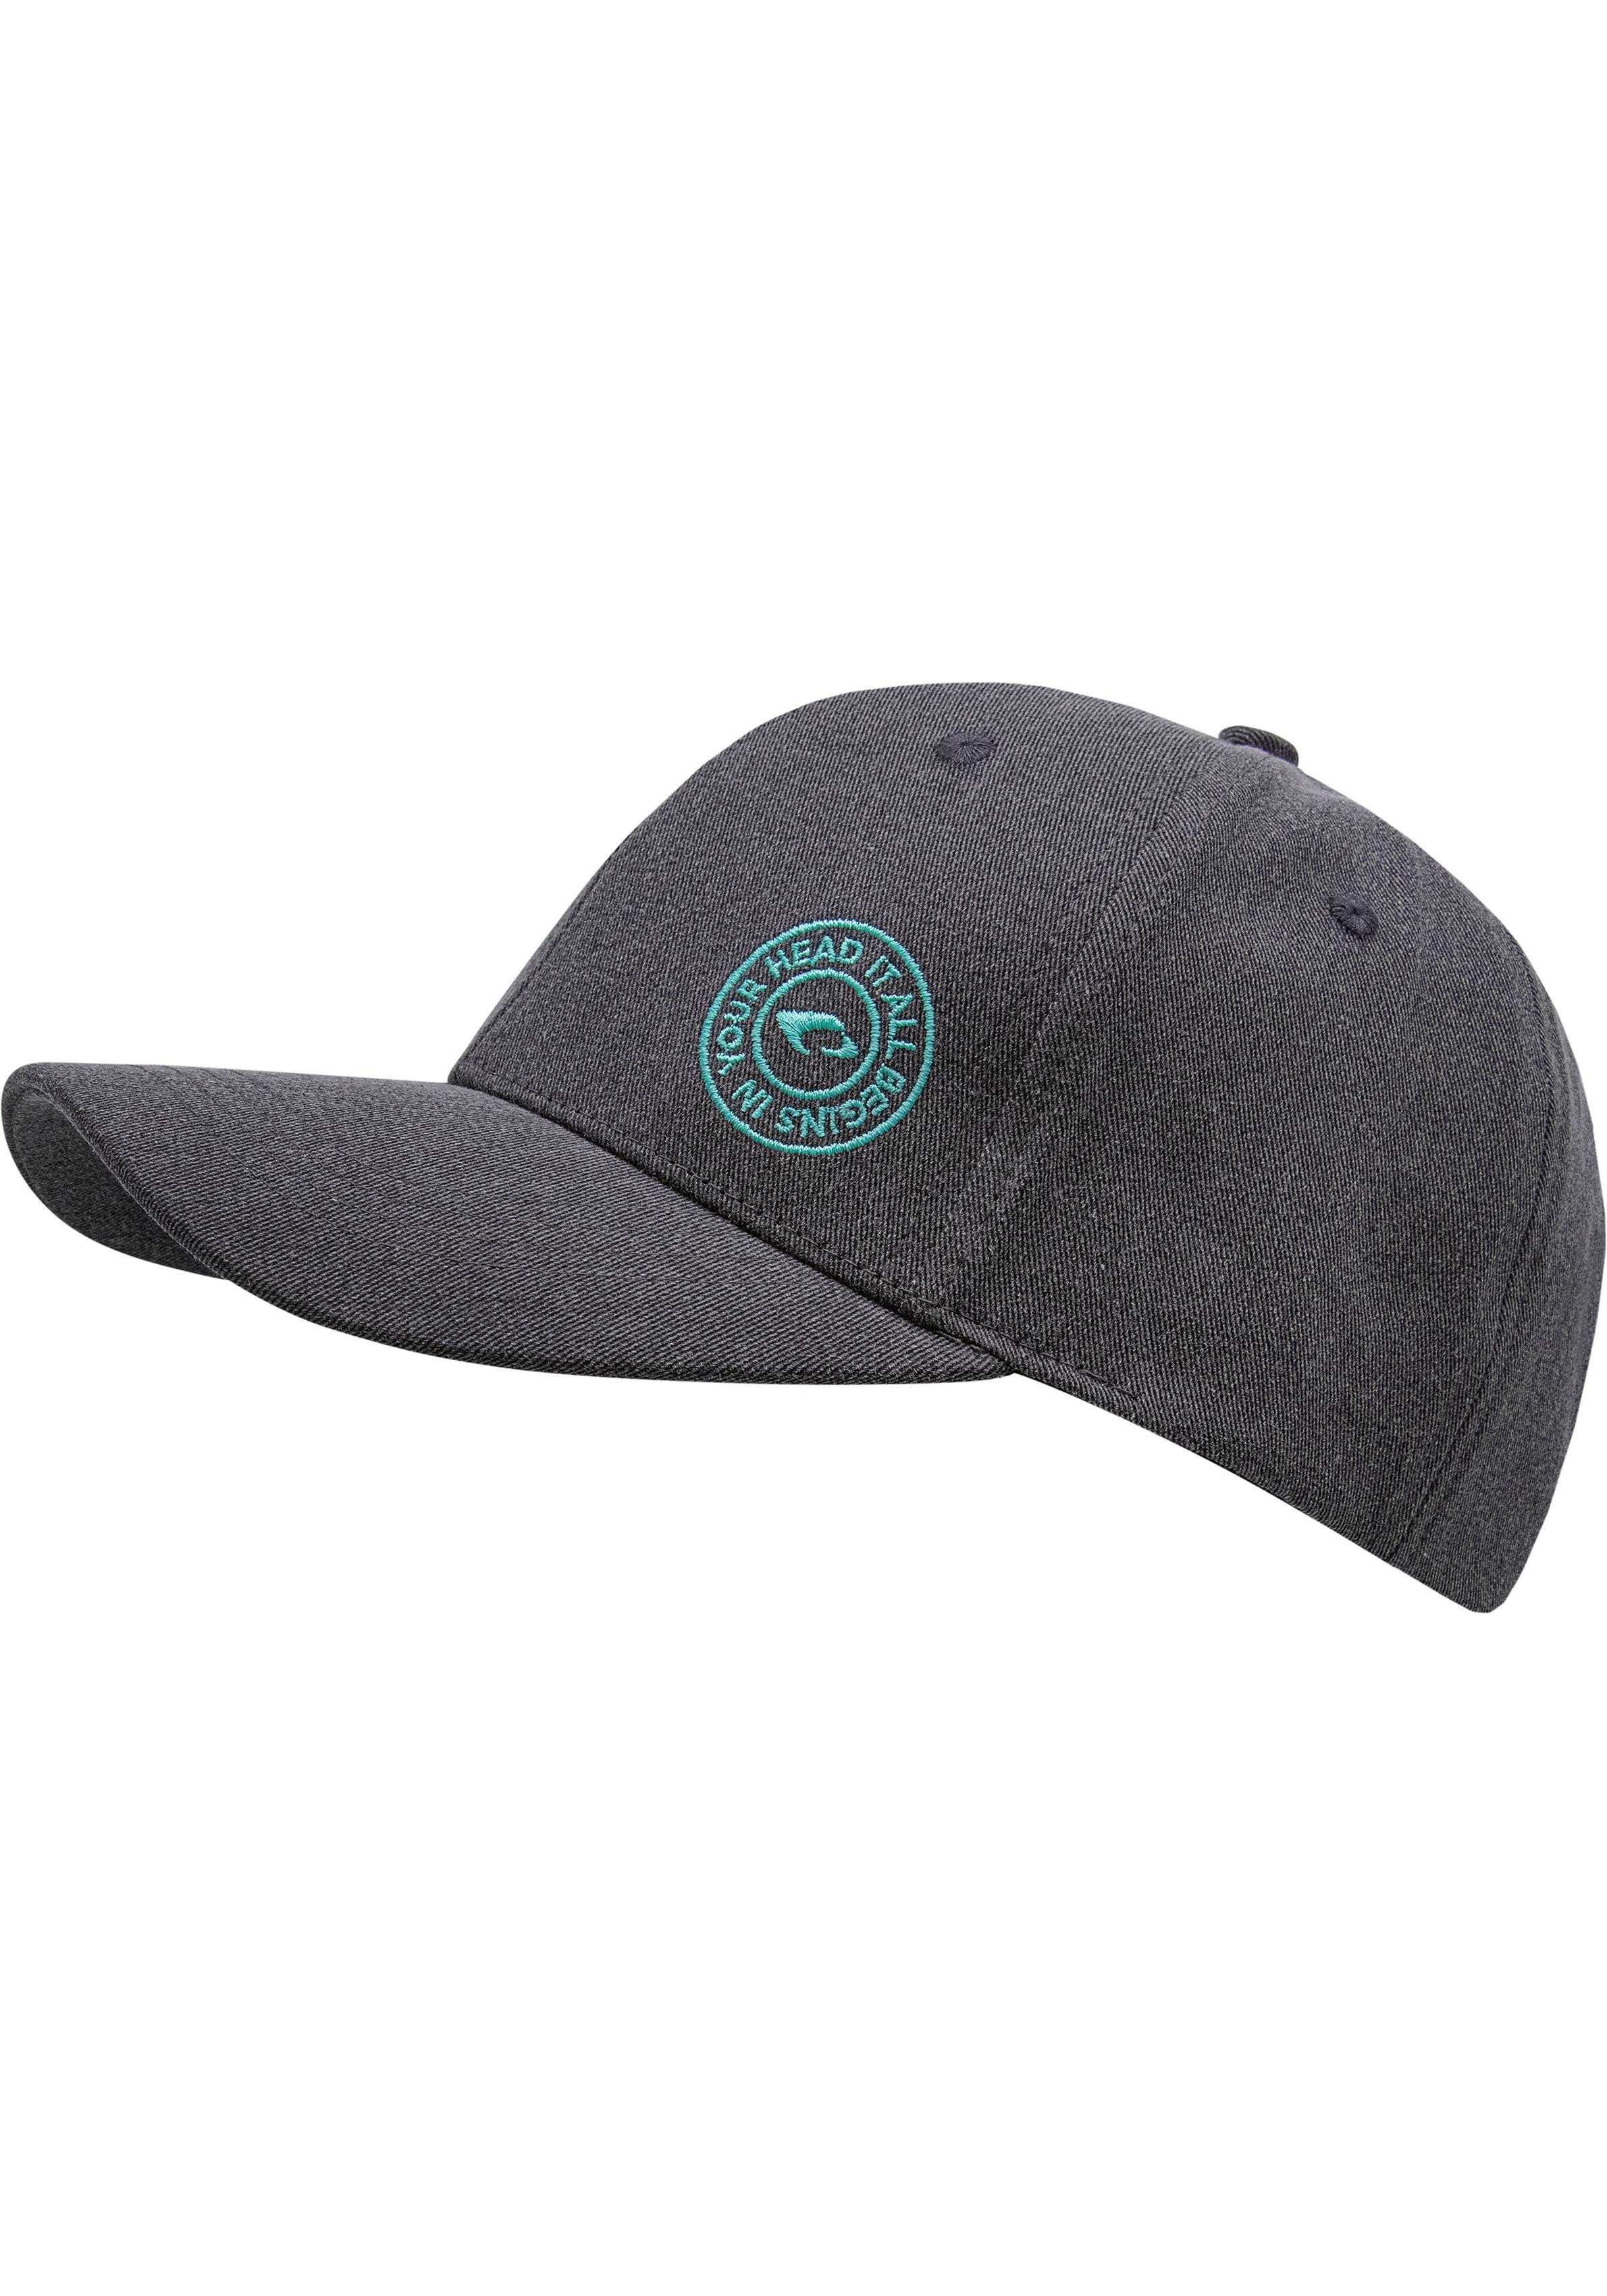 chillouts Baseball Cap Arklow verstellbar Hat, Individuell